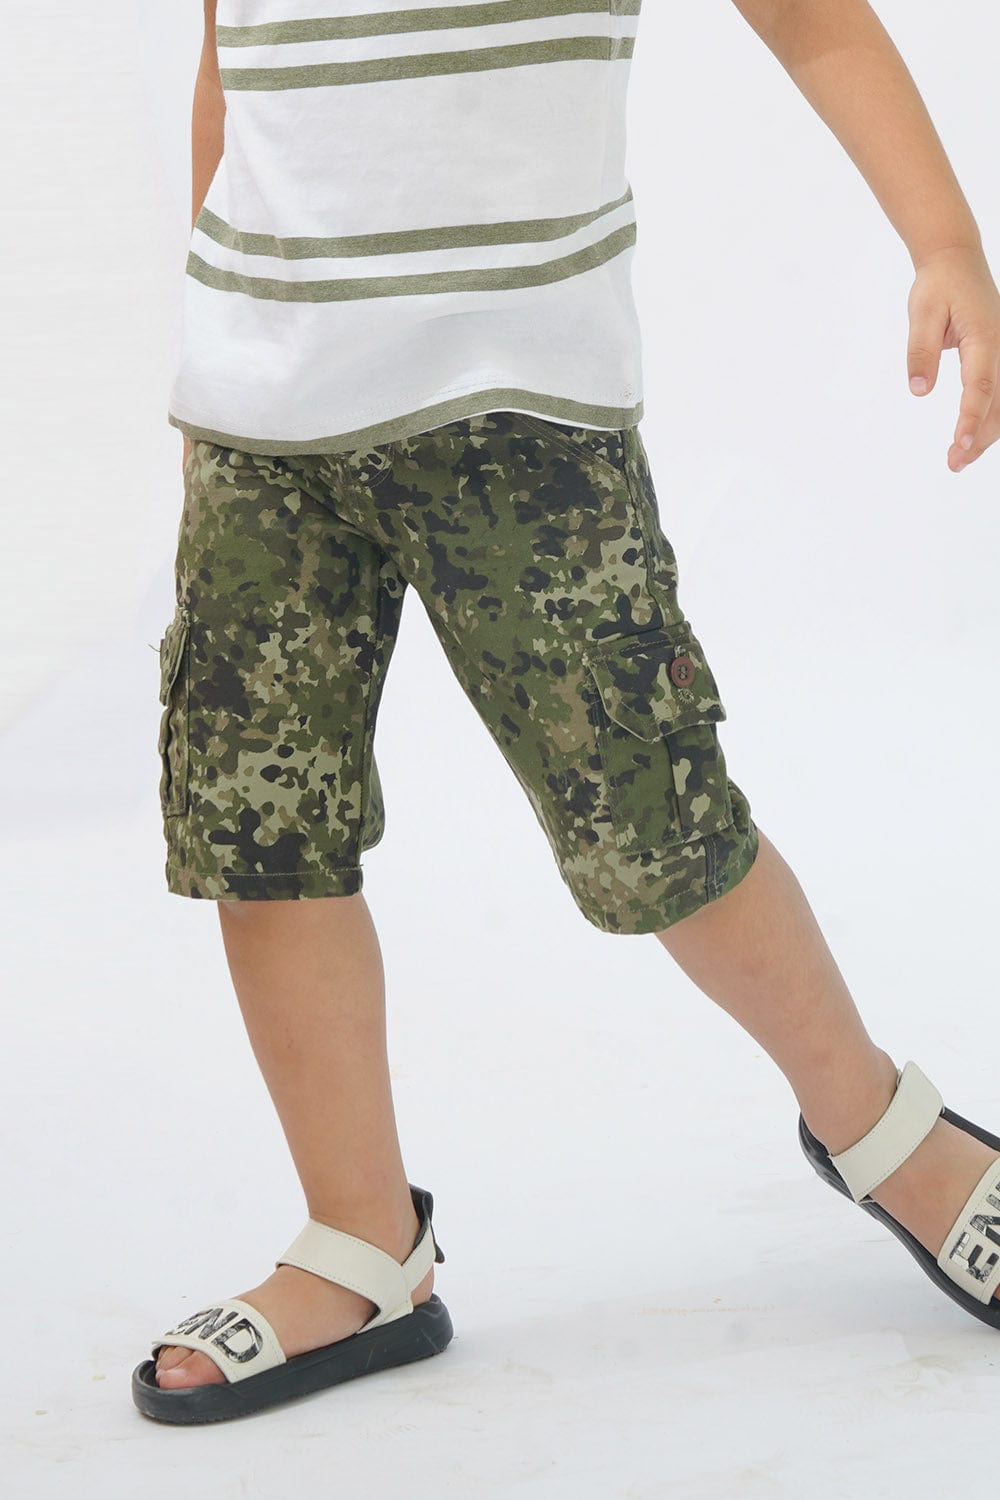 Hope Not Out by Shahid Afridi Boys Non Denim Shorts Camo Graphic Shorts